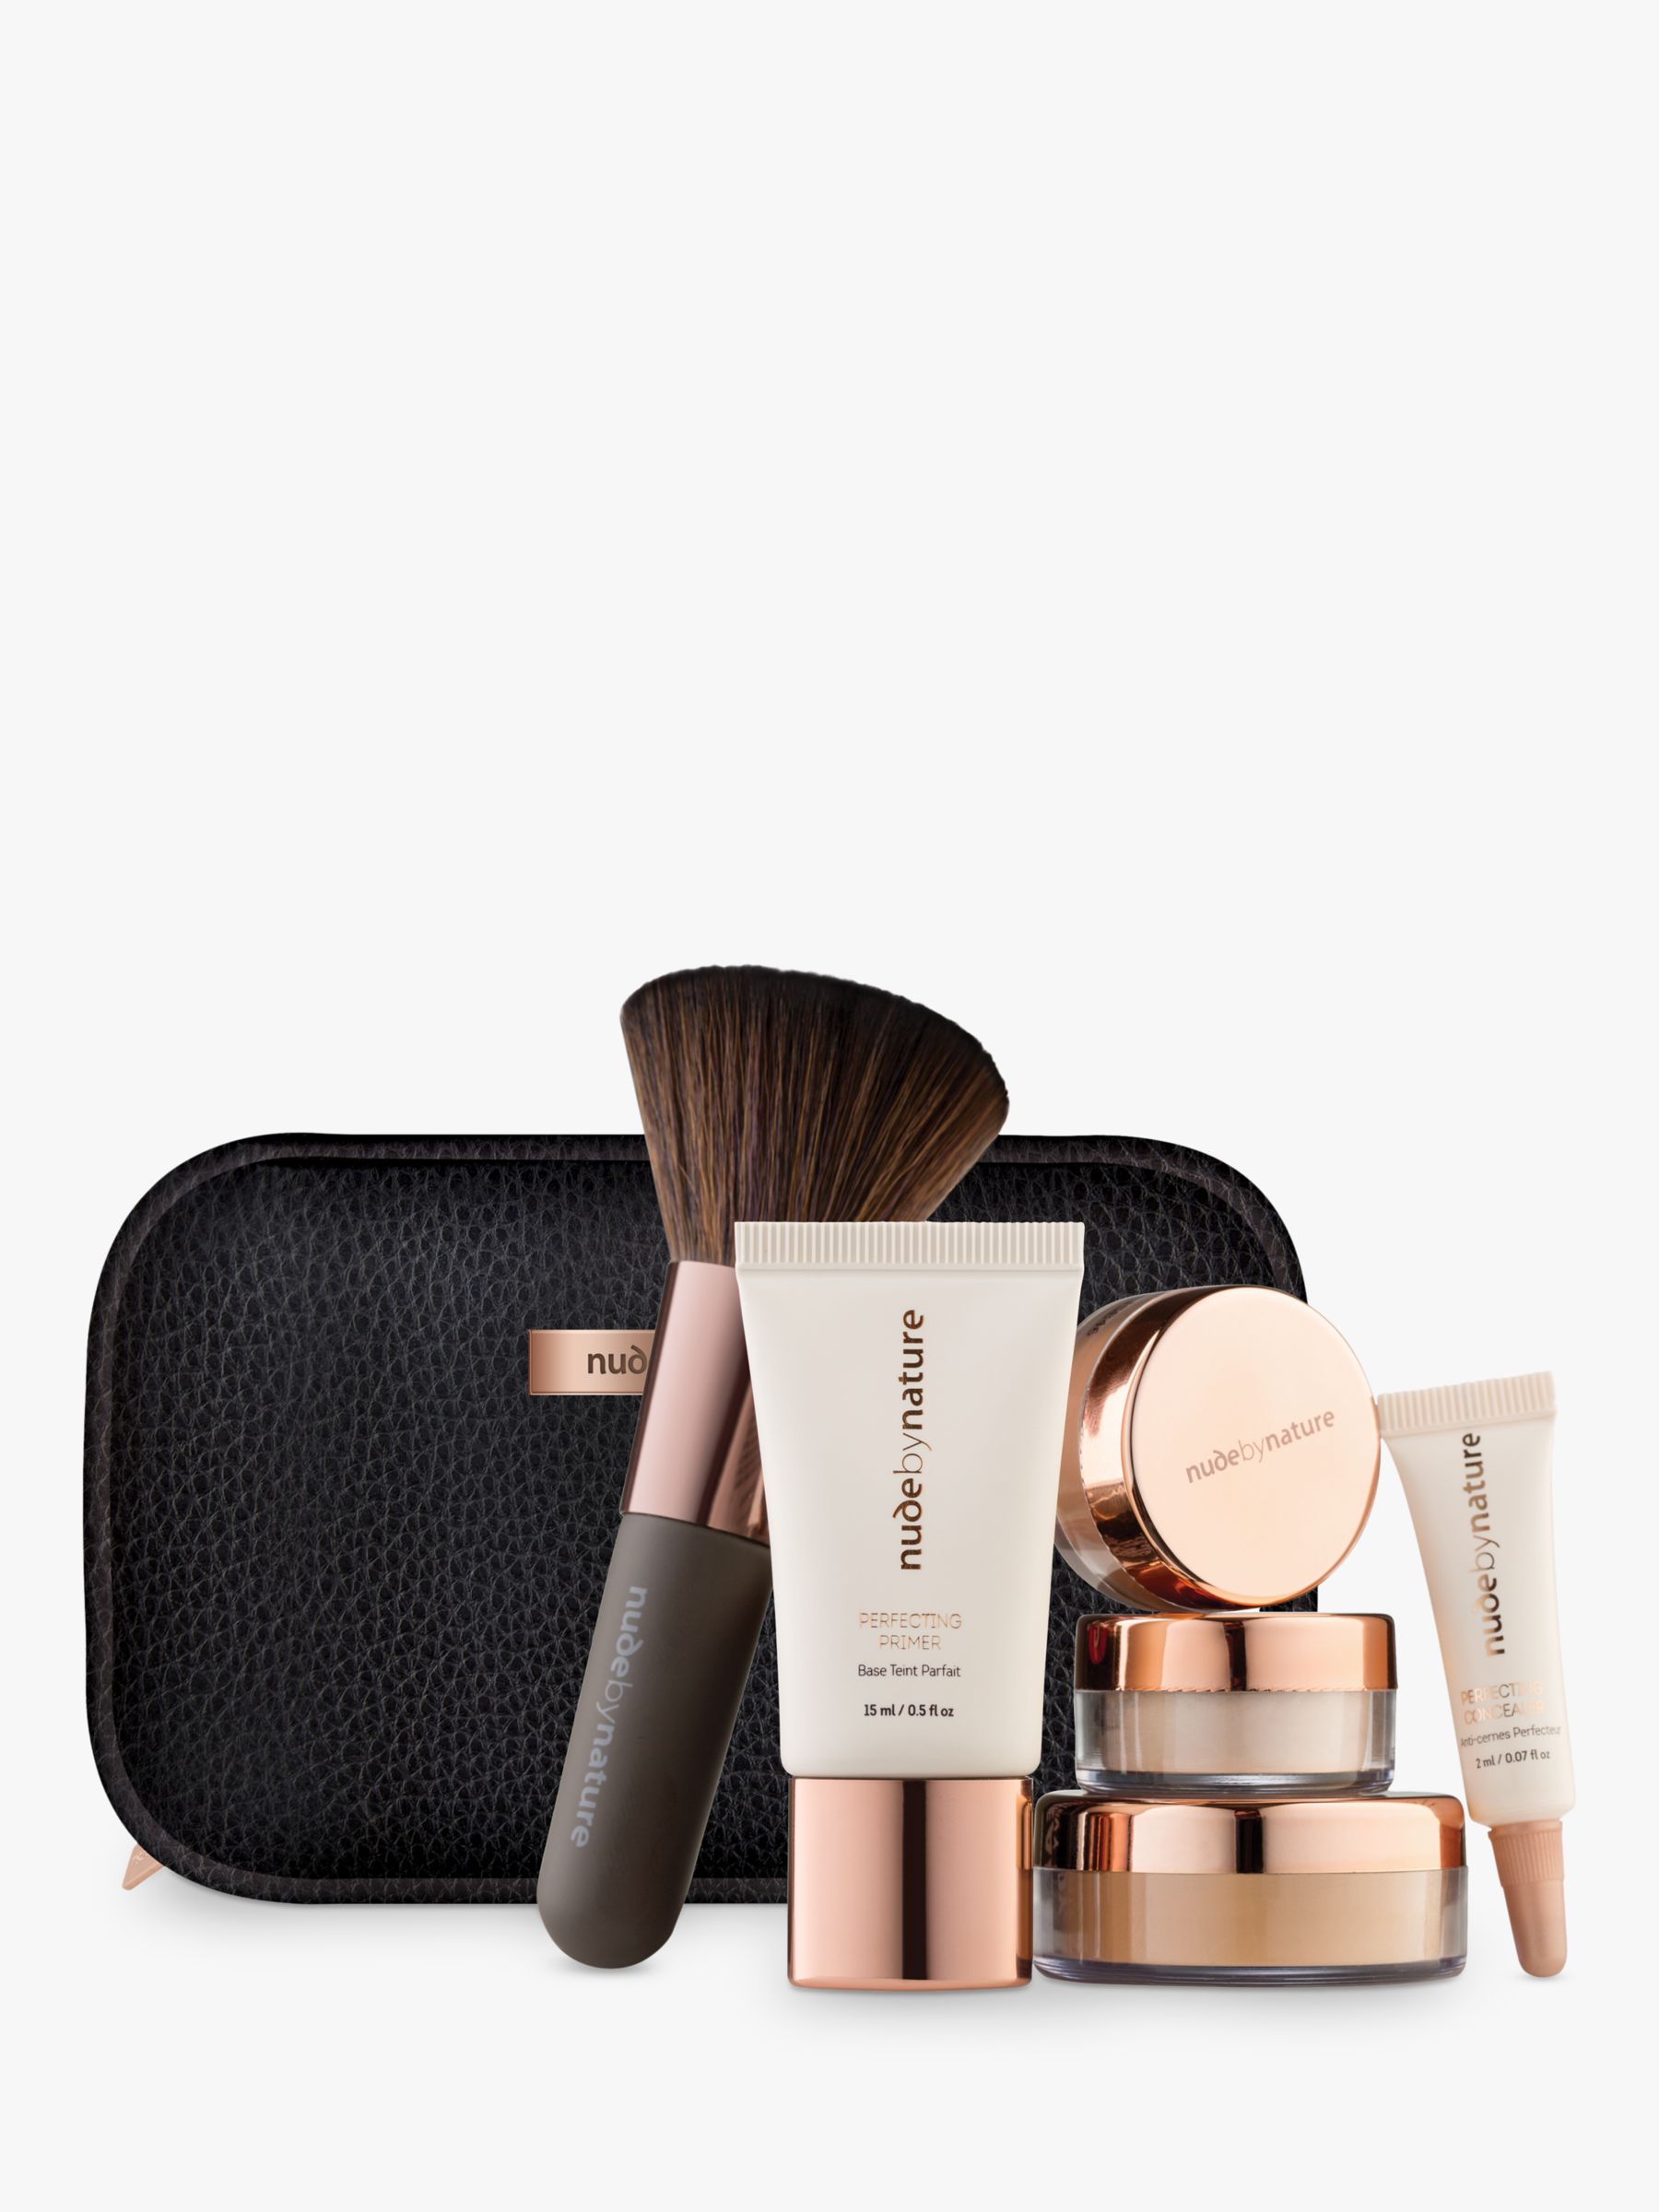 Nude by Nature Complexion Essentials Kit, N5